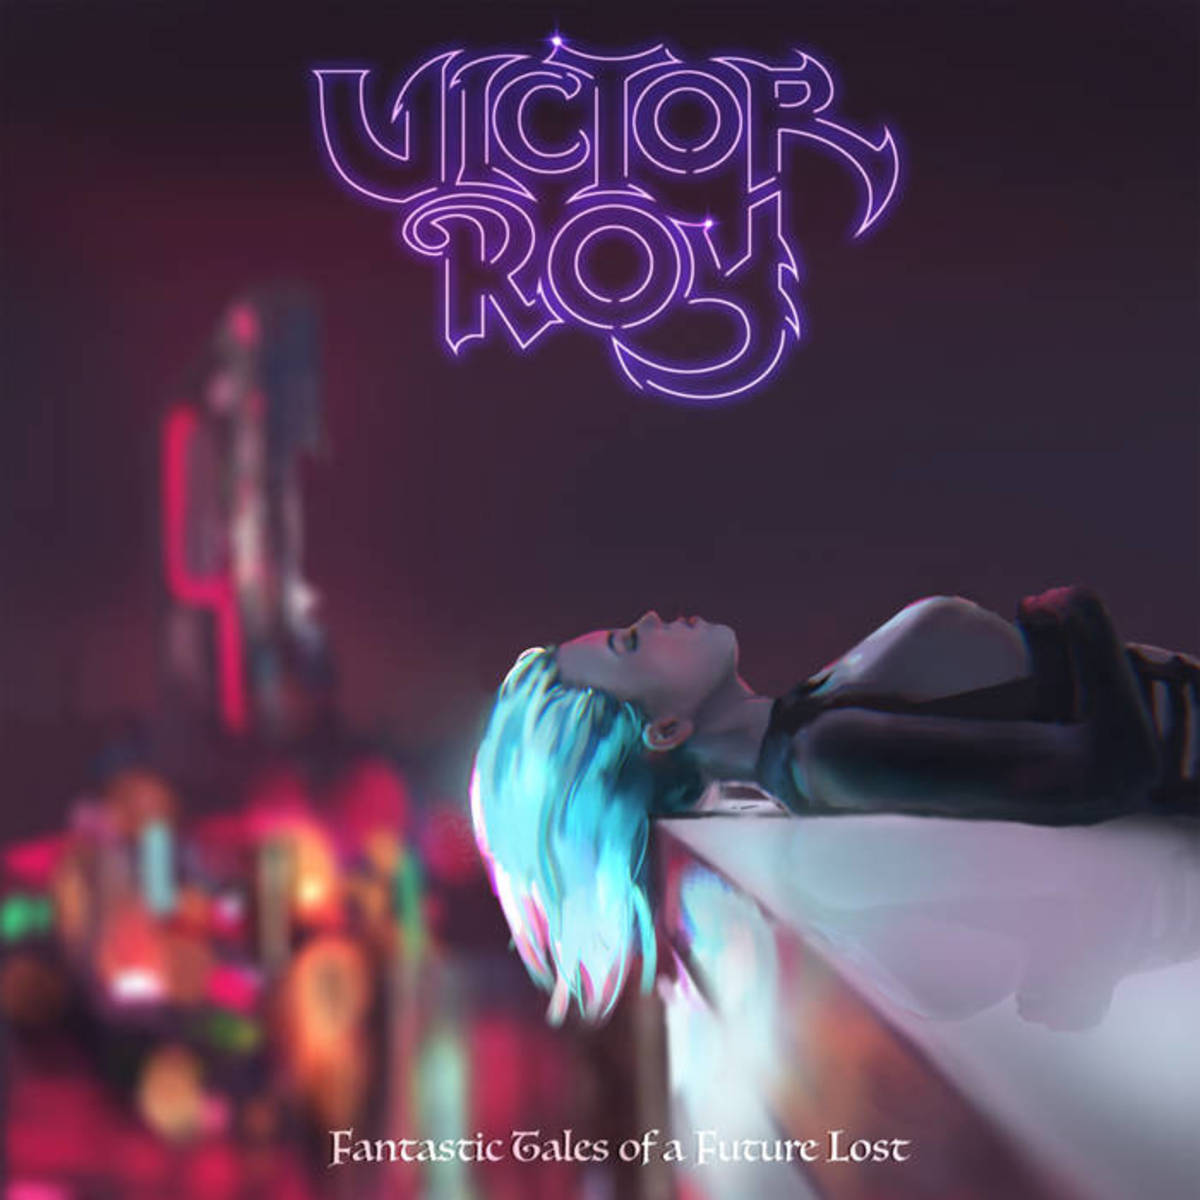 synth-album-review-fantastic-tales-of-a-future-lost-by-victor-roy